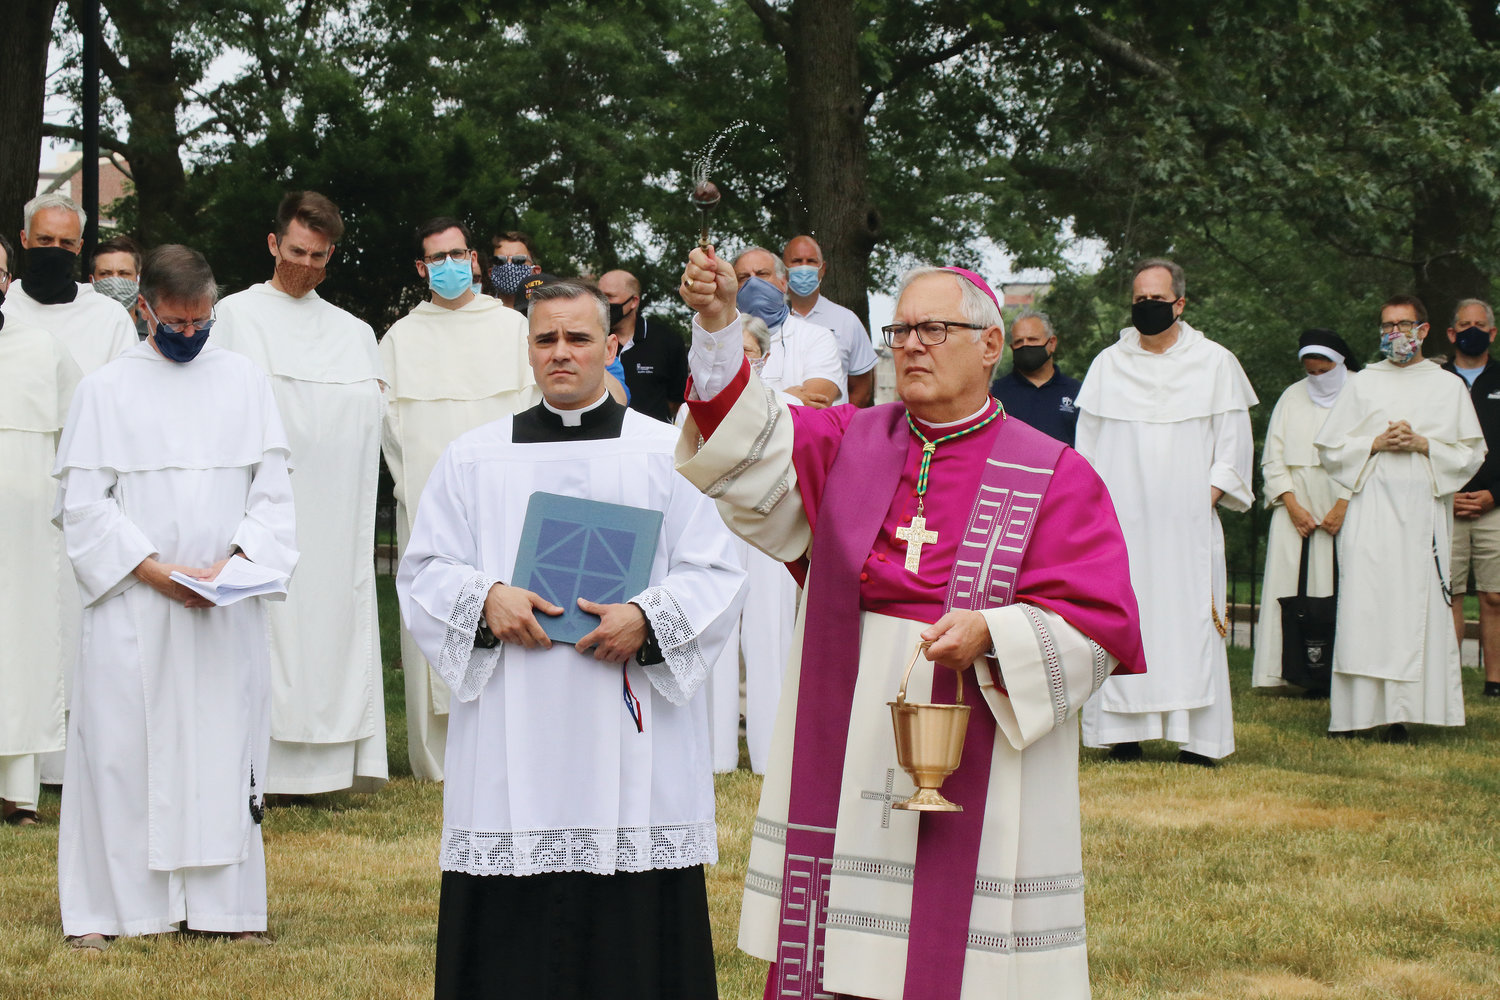 Bishop Thomas J. Tobin blesses the Dominican Cemetery’s grounds and central cross as he reconsecrates the sacred burial ground following the vandalism attack.